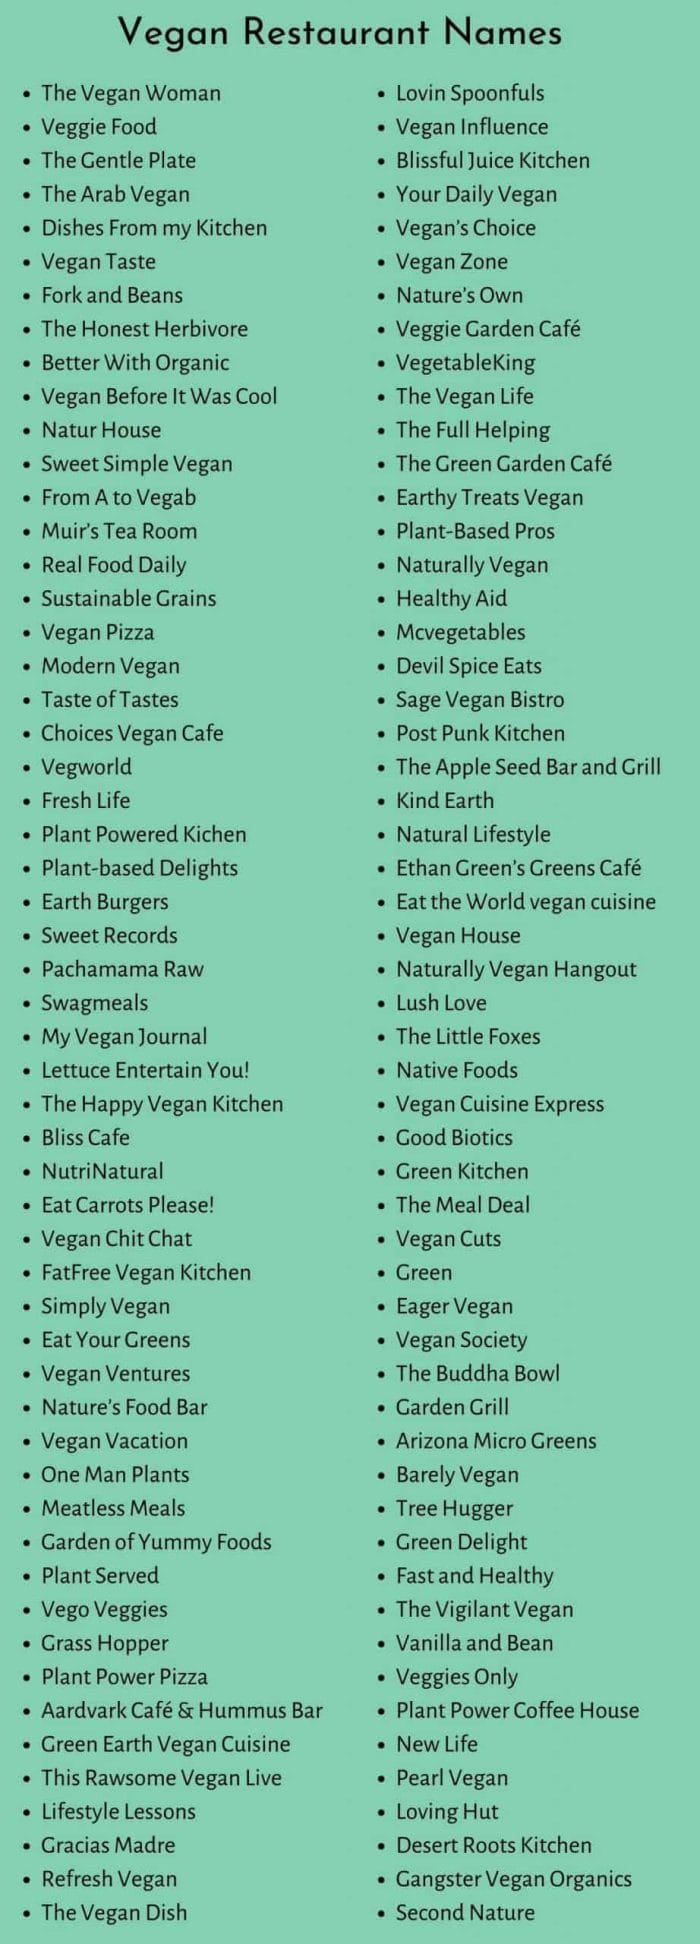  Catchy Vegan Restaurant Names Ideas And Suggestions - Name Ideas For Vegan Business